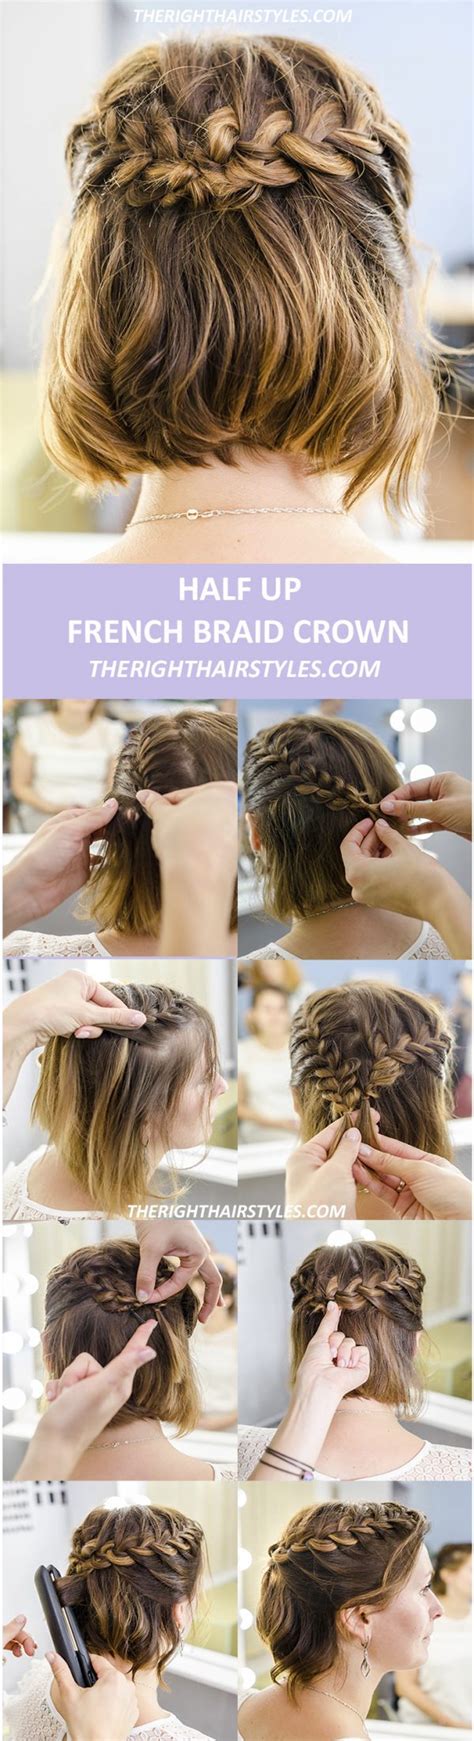 An ideal hair length for a french braid can vary but you want to make sure the hair is long enough to tuck under itself without popping out, explains fortuin. How to Do a Half-Up French Braid Crown in 6 Easy Steps